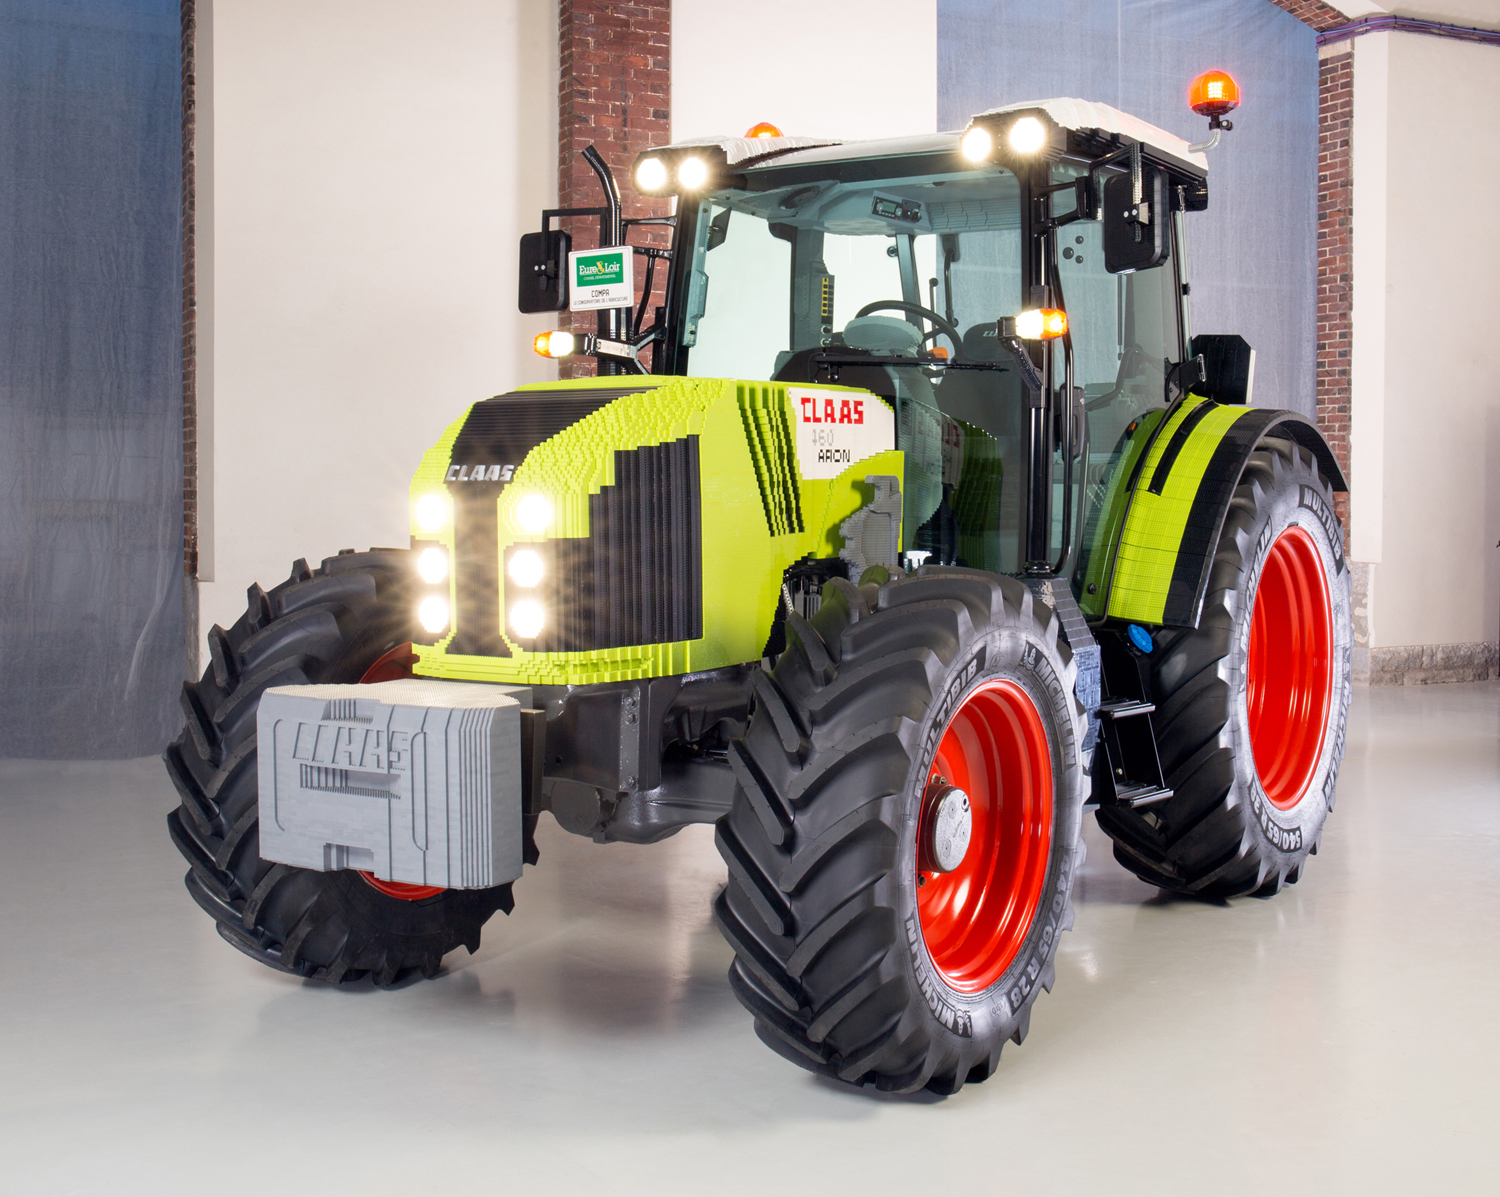 Lull kost Gym Lego Tractor made of 800,000 Bricks - CLAAS news | CLAAS